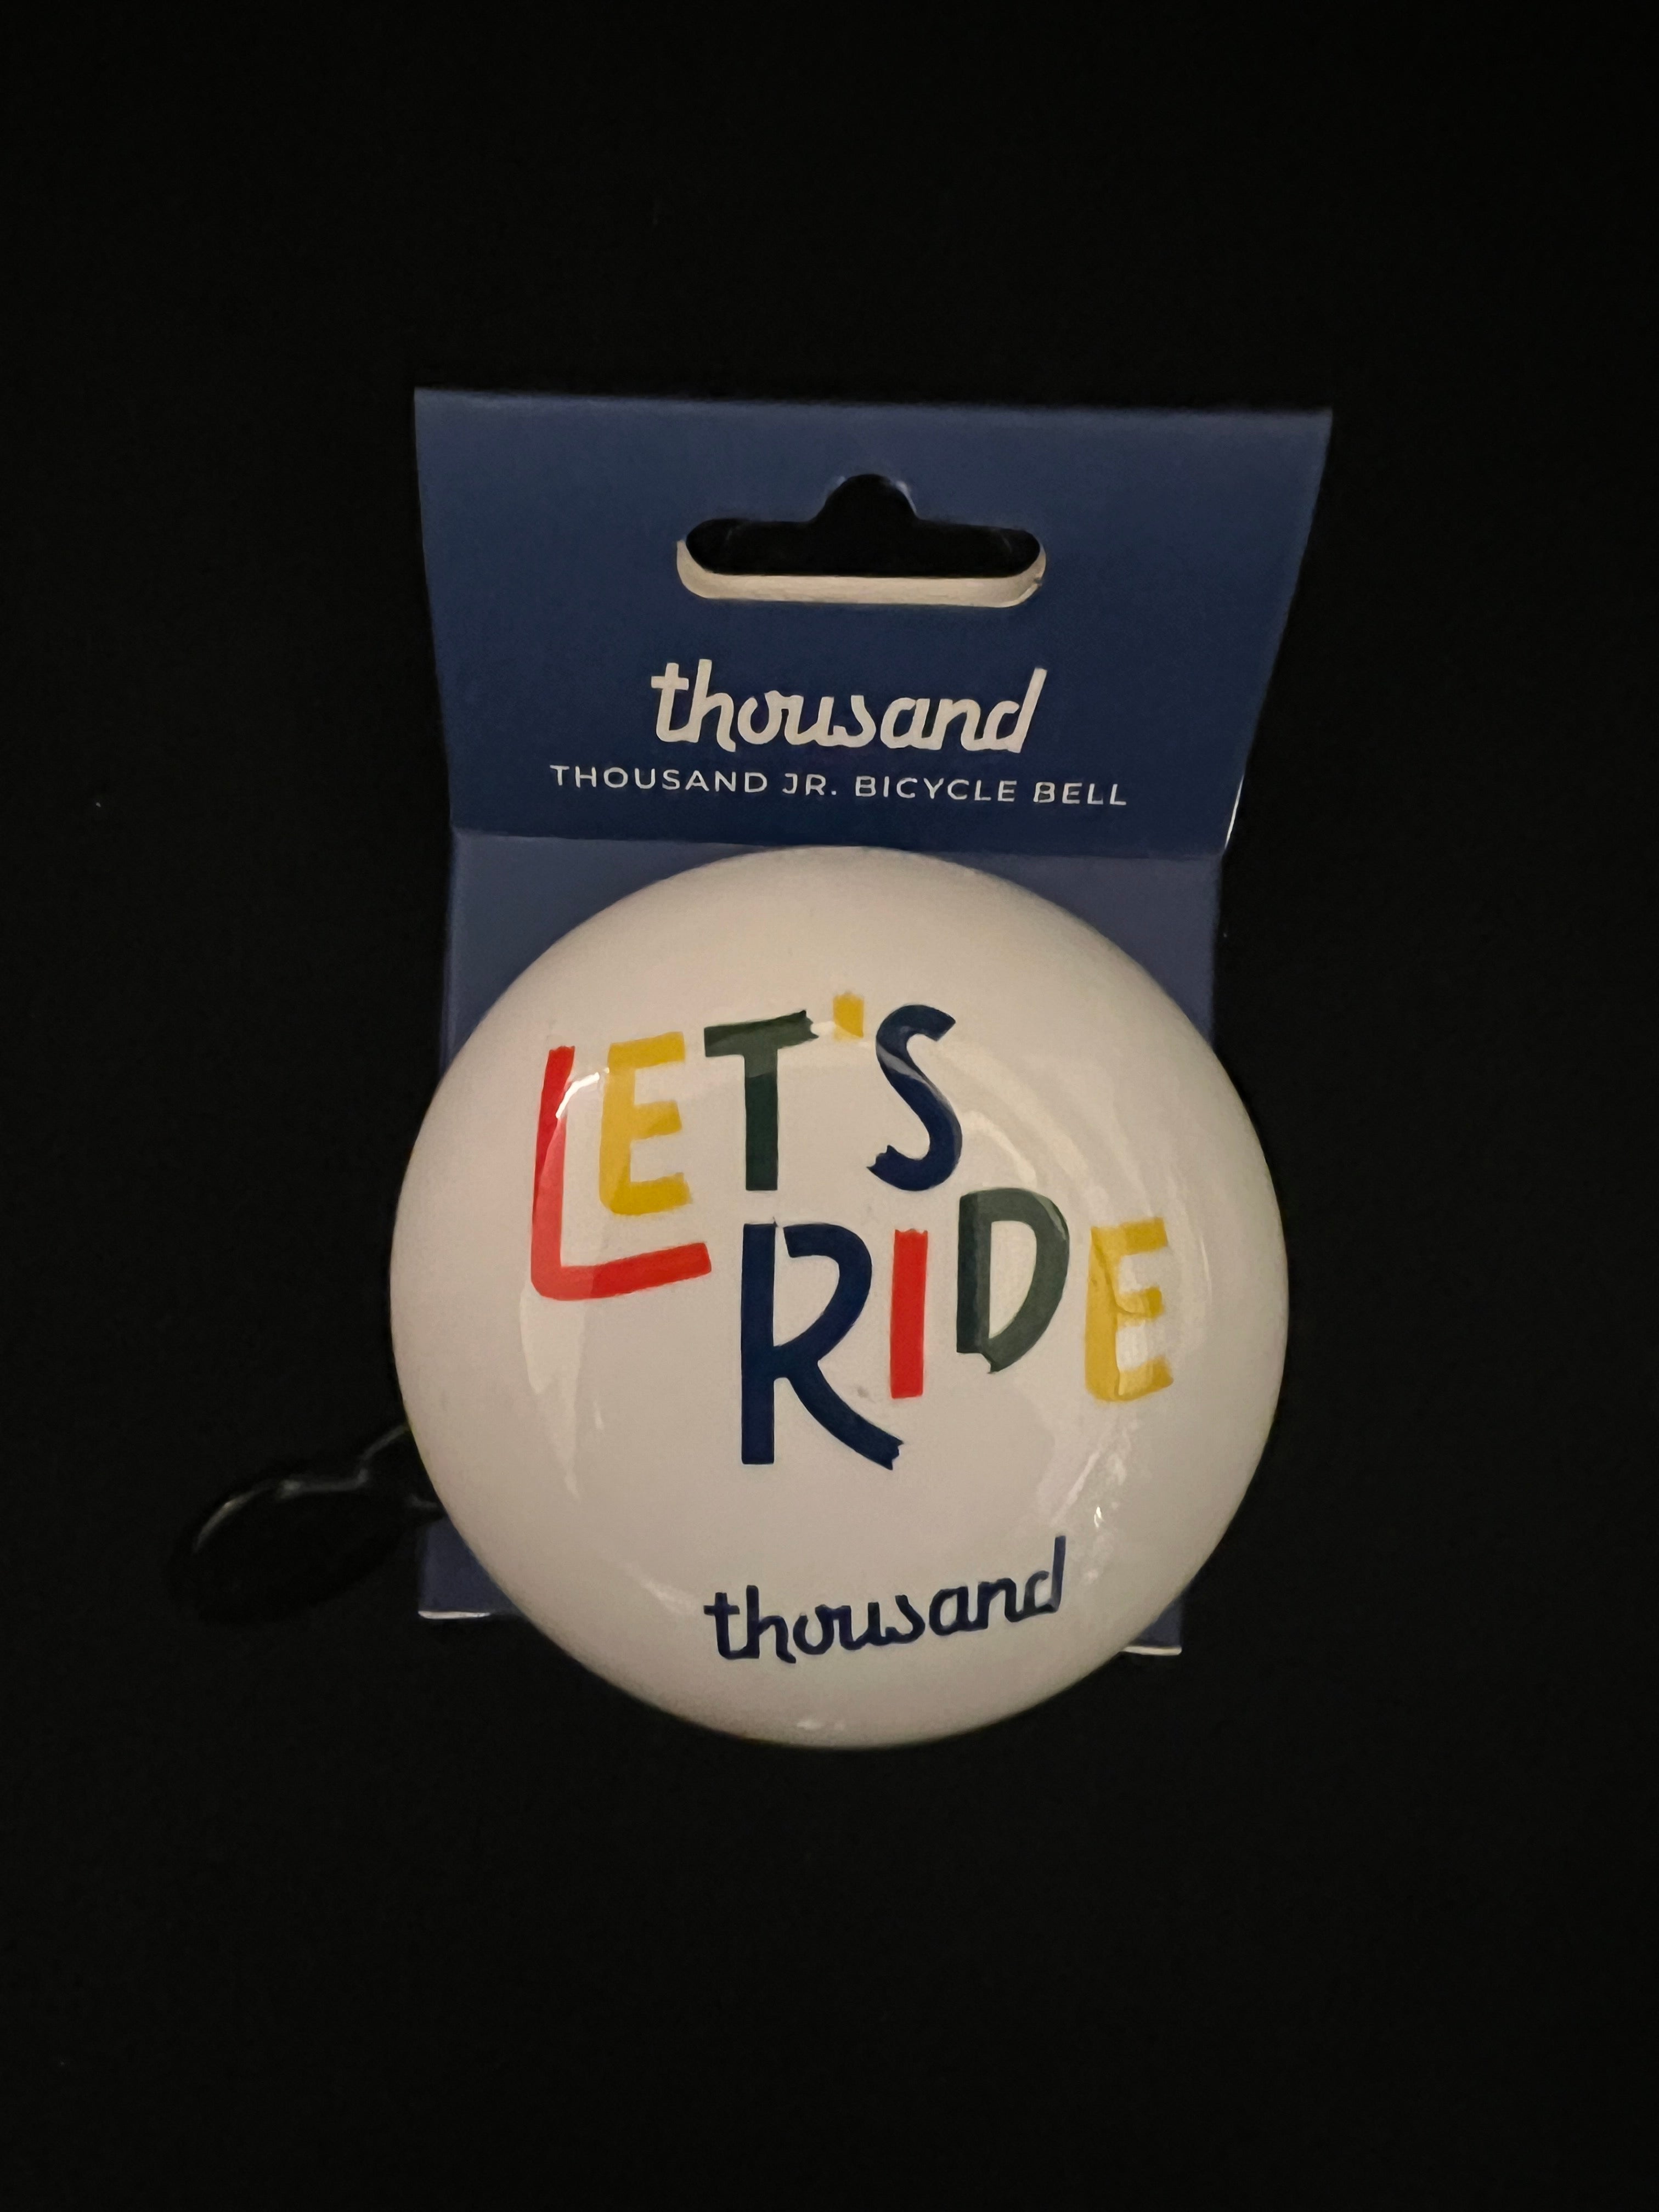 Thousand JR. Bicycle Bell